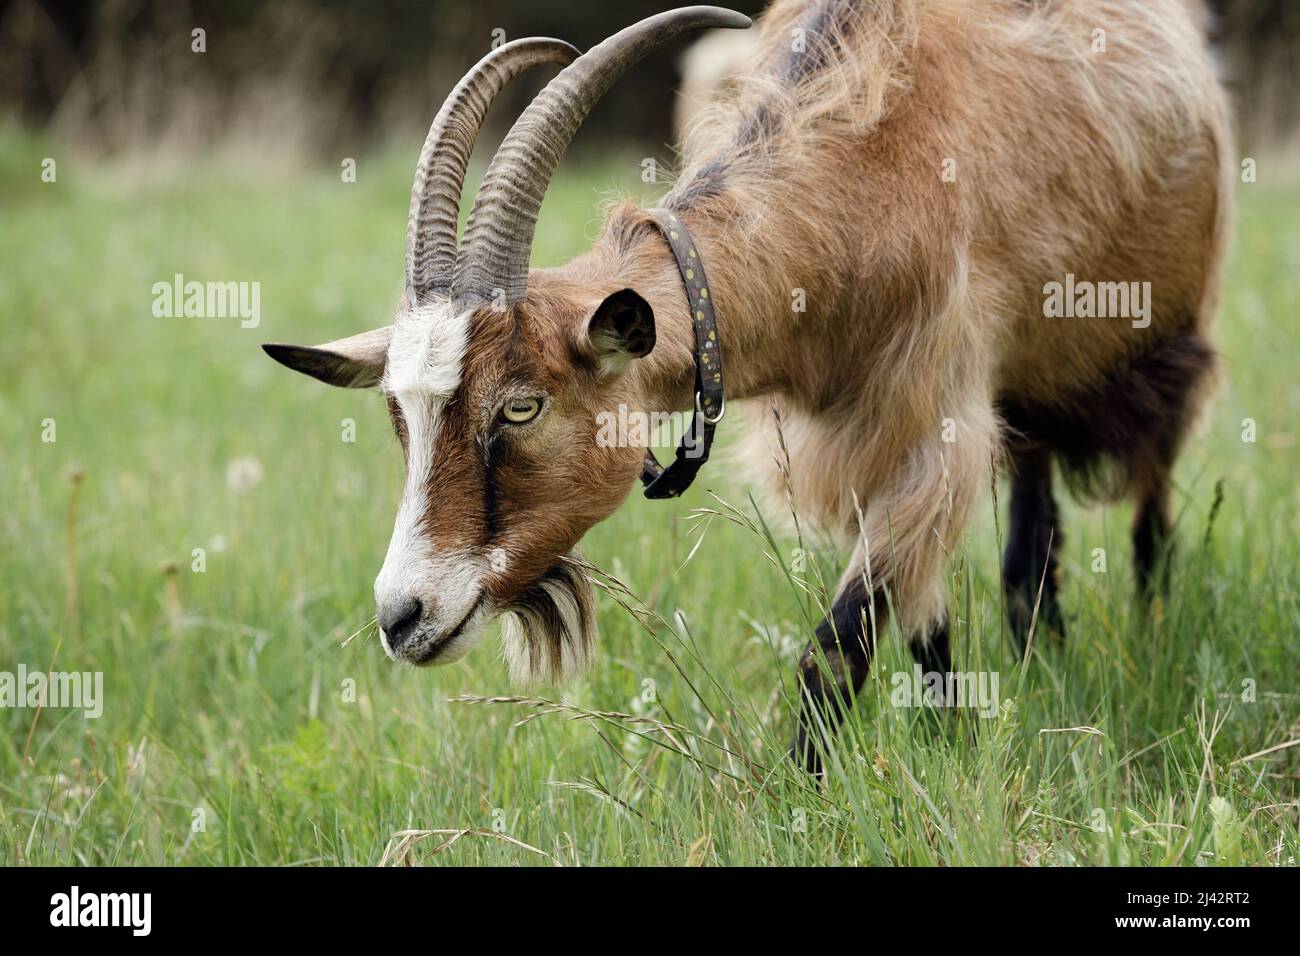 Close-up portrait of brown goat with long curved horns in a meadow. Stock Photo